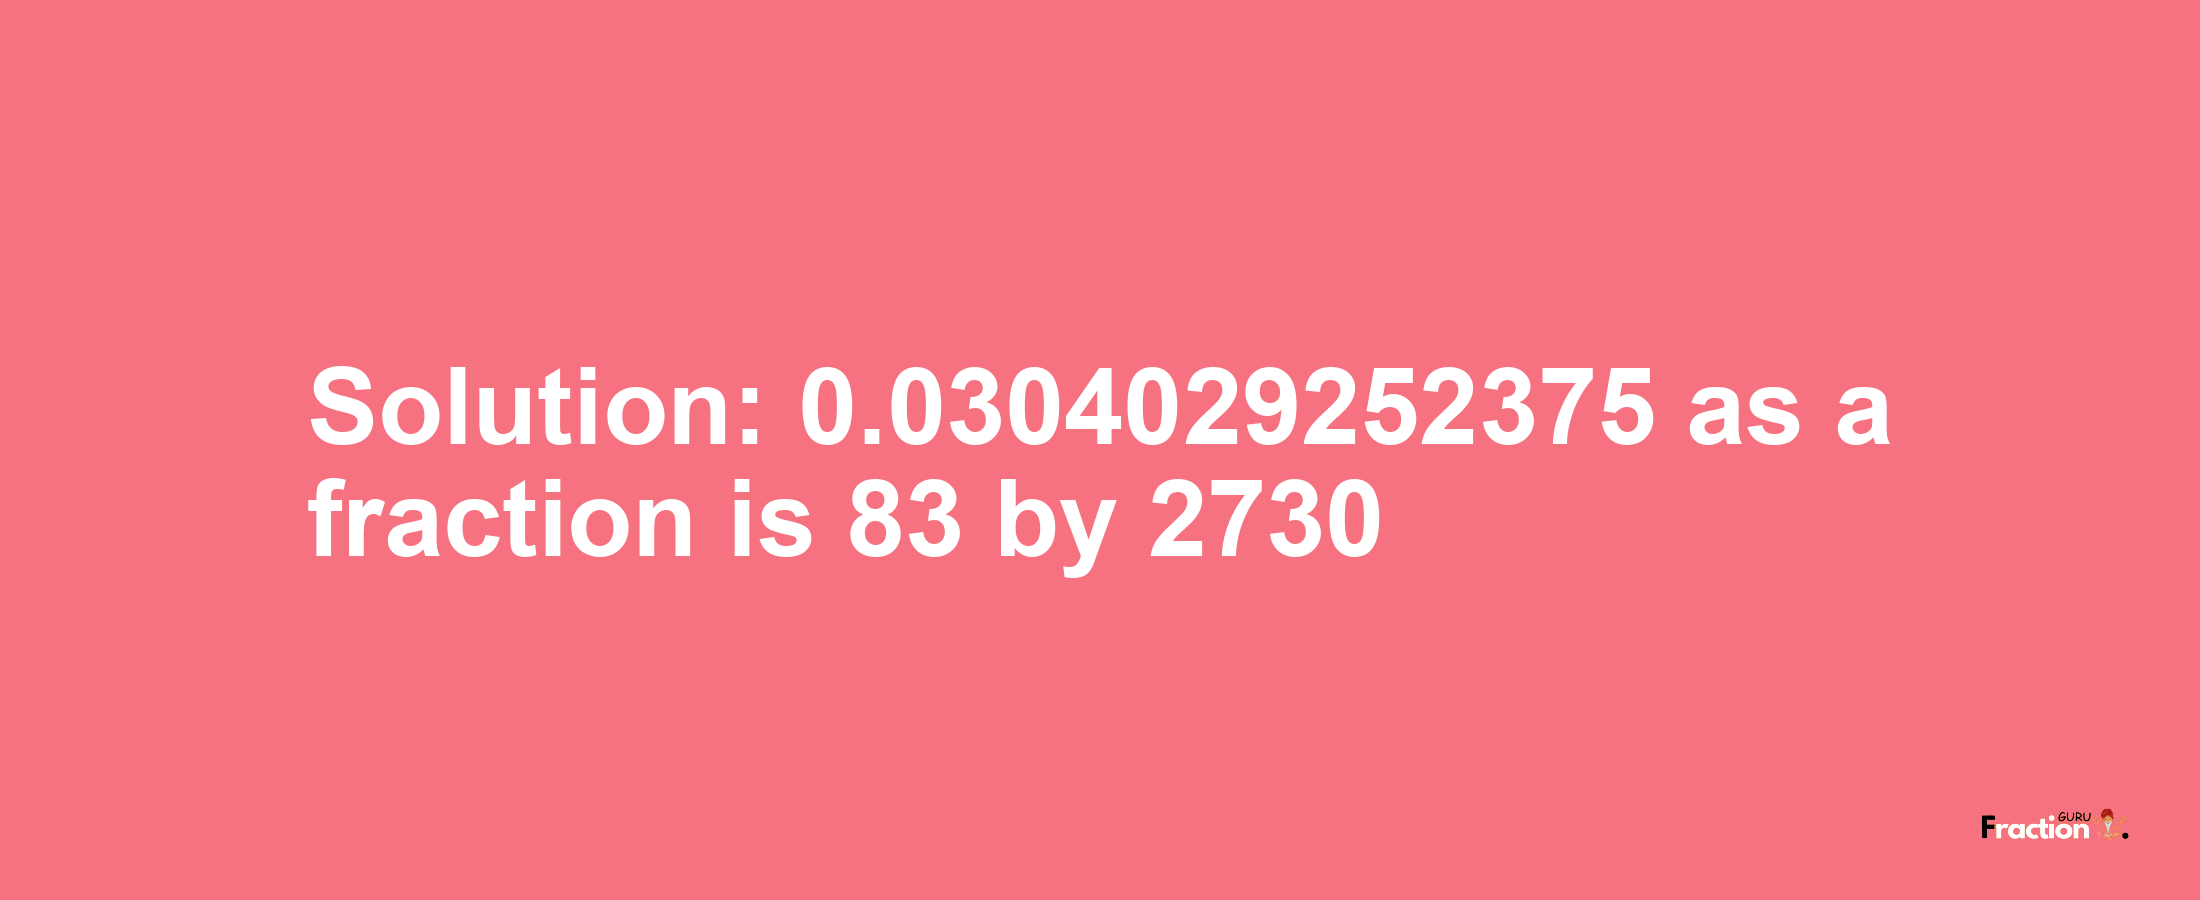 Solution:0.0304029252375 as a fraction is 83/2730